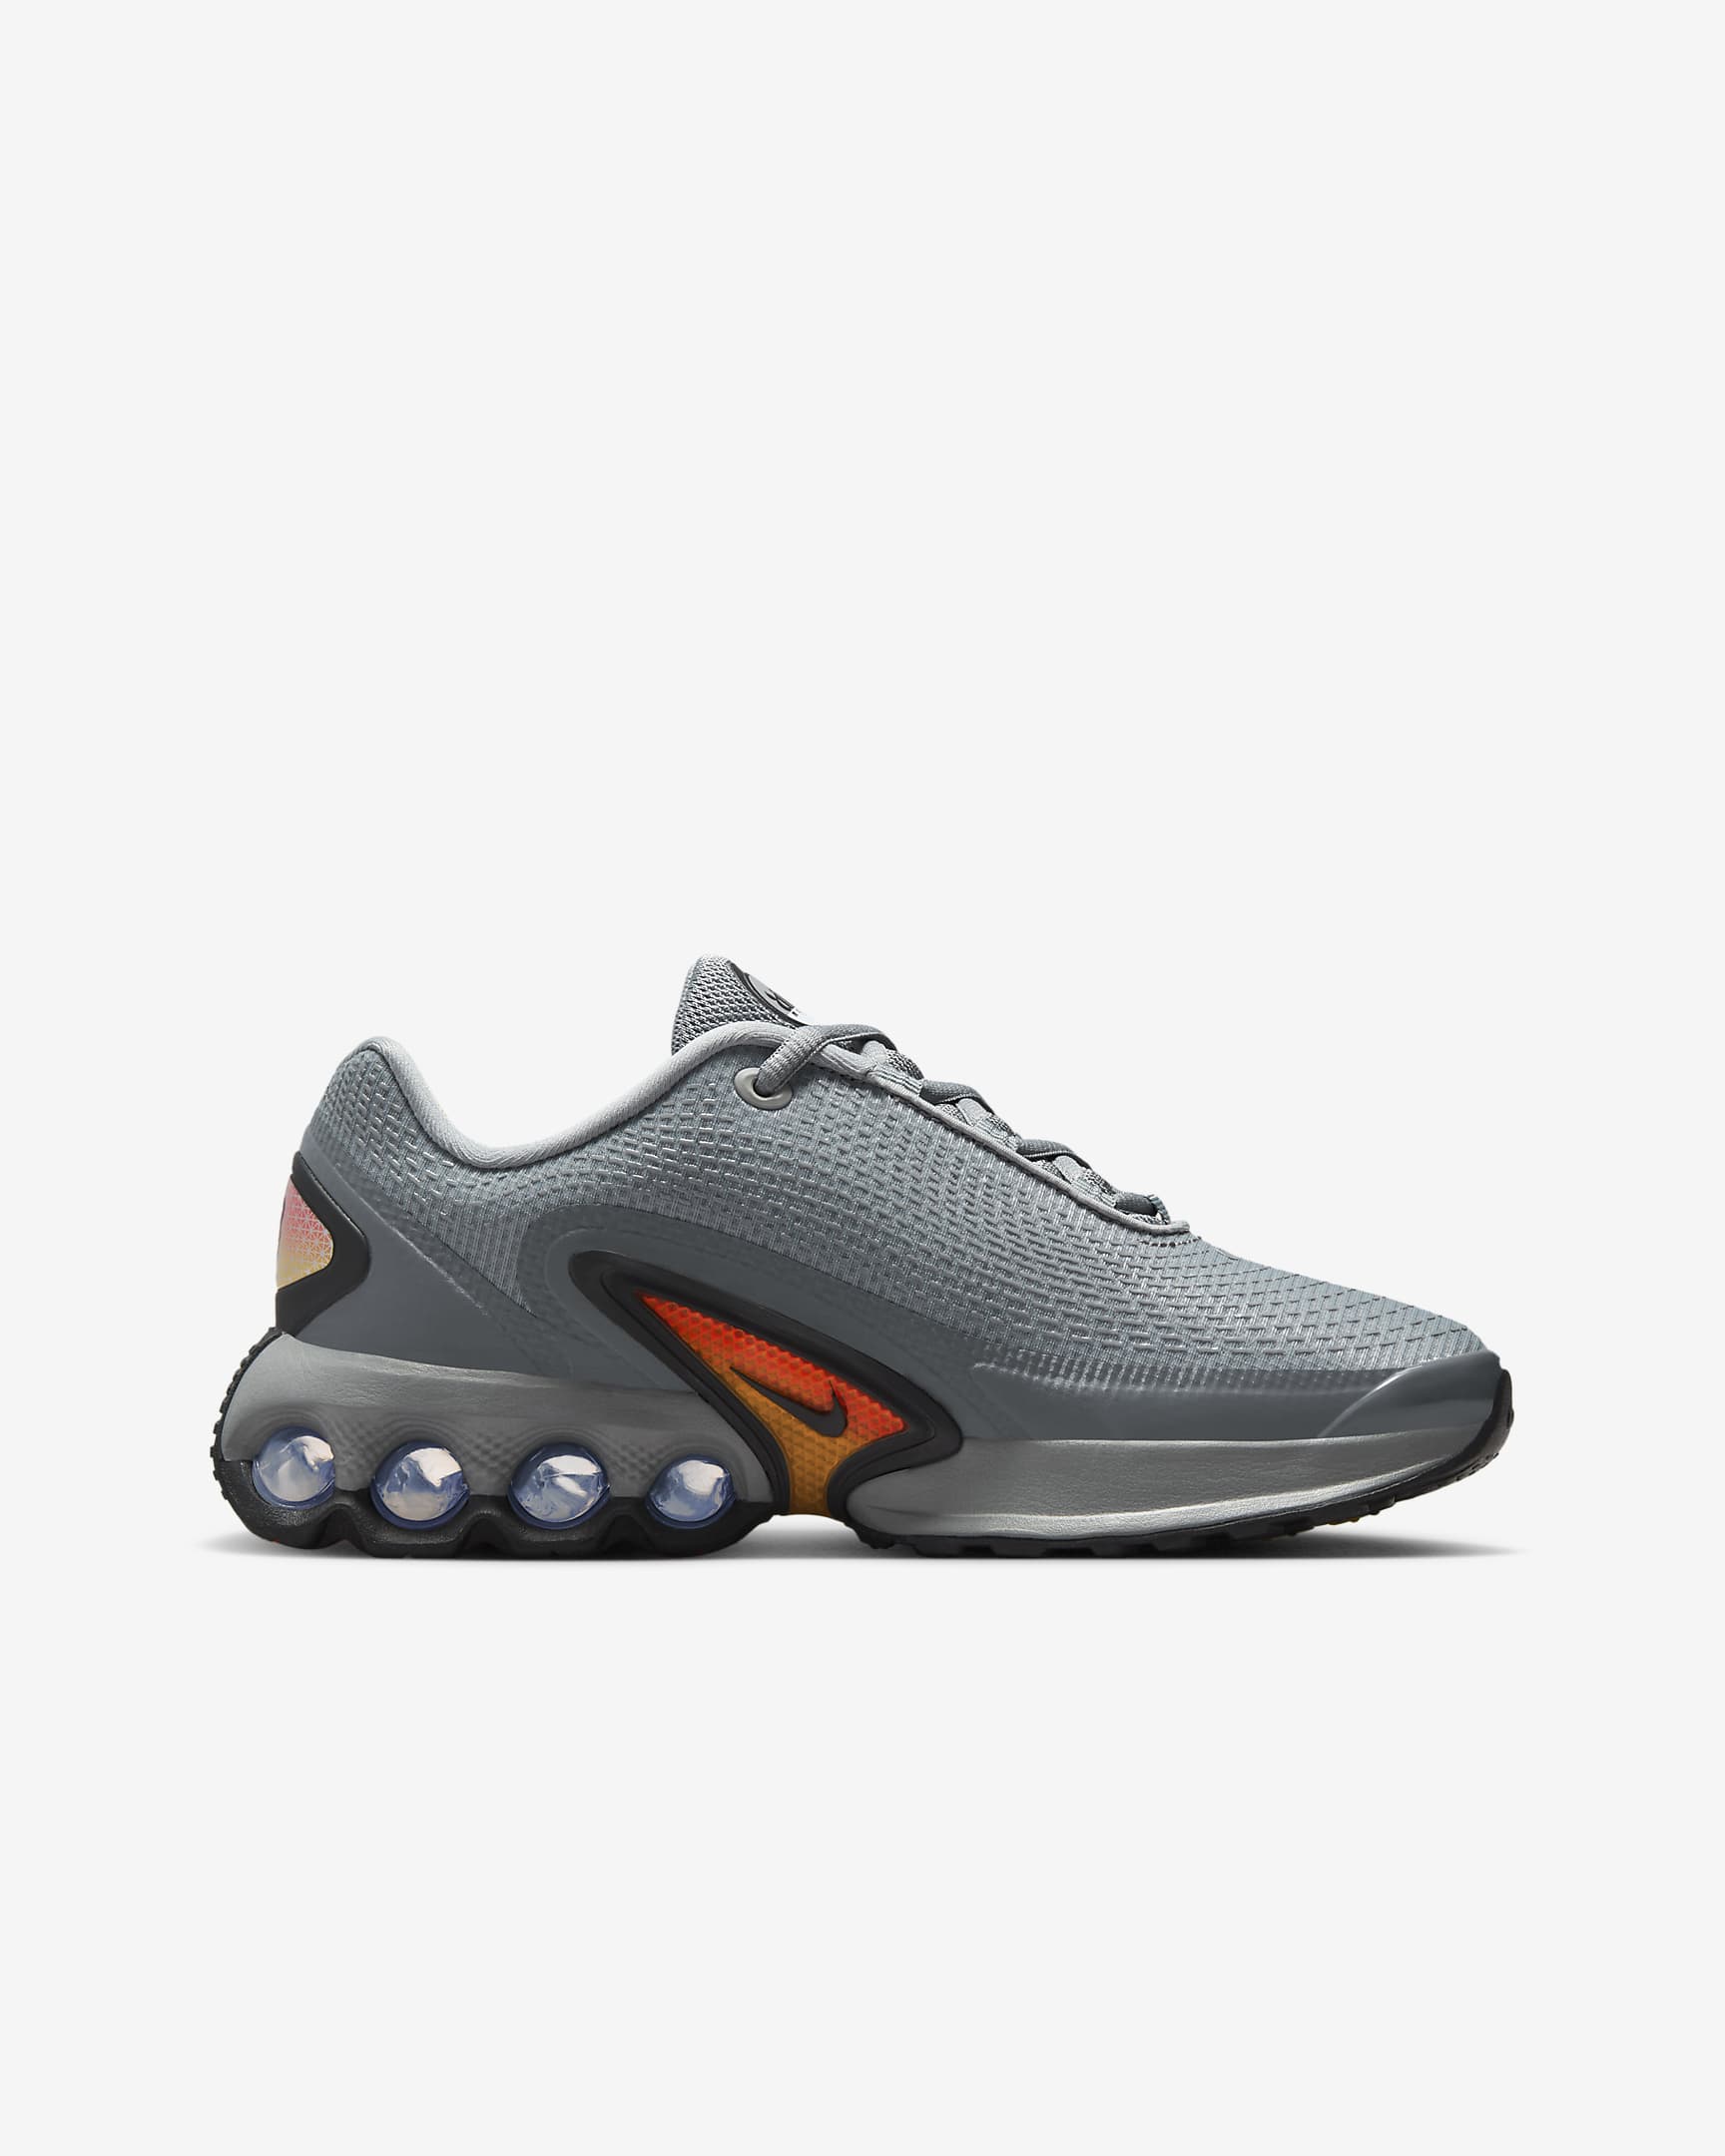 Chaussure Nike Air Max Dn pour ado - Particle Grey/Smoke Grey/Wolf Grey/Noir